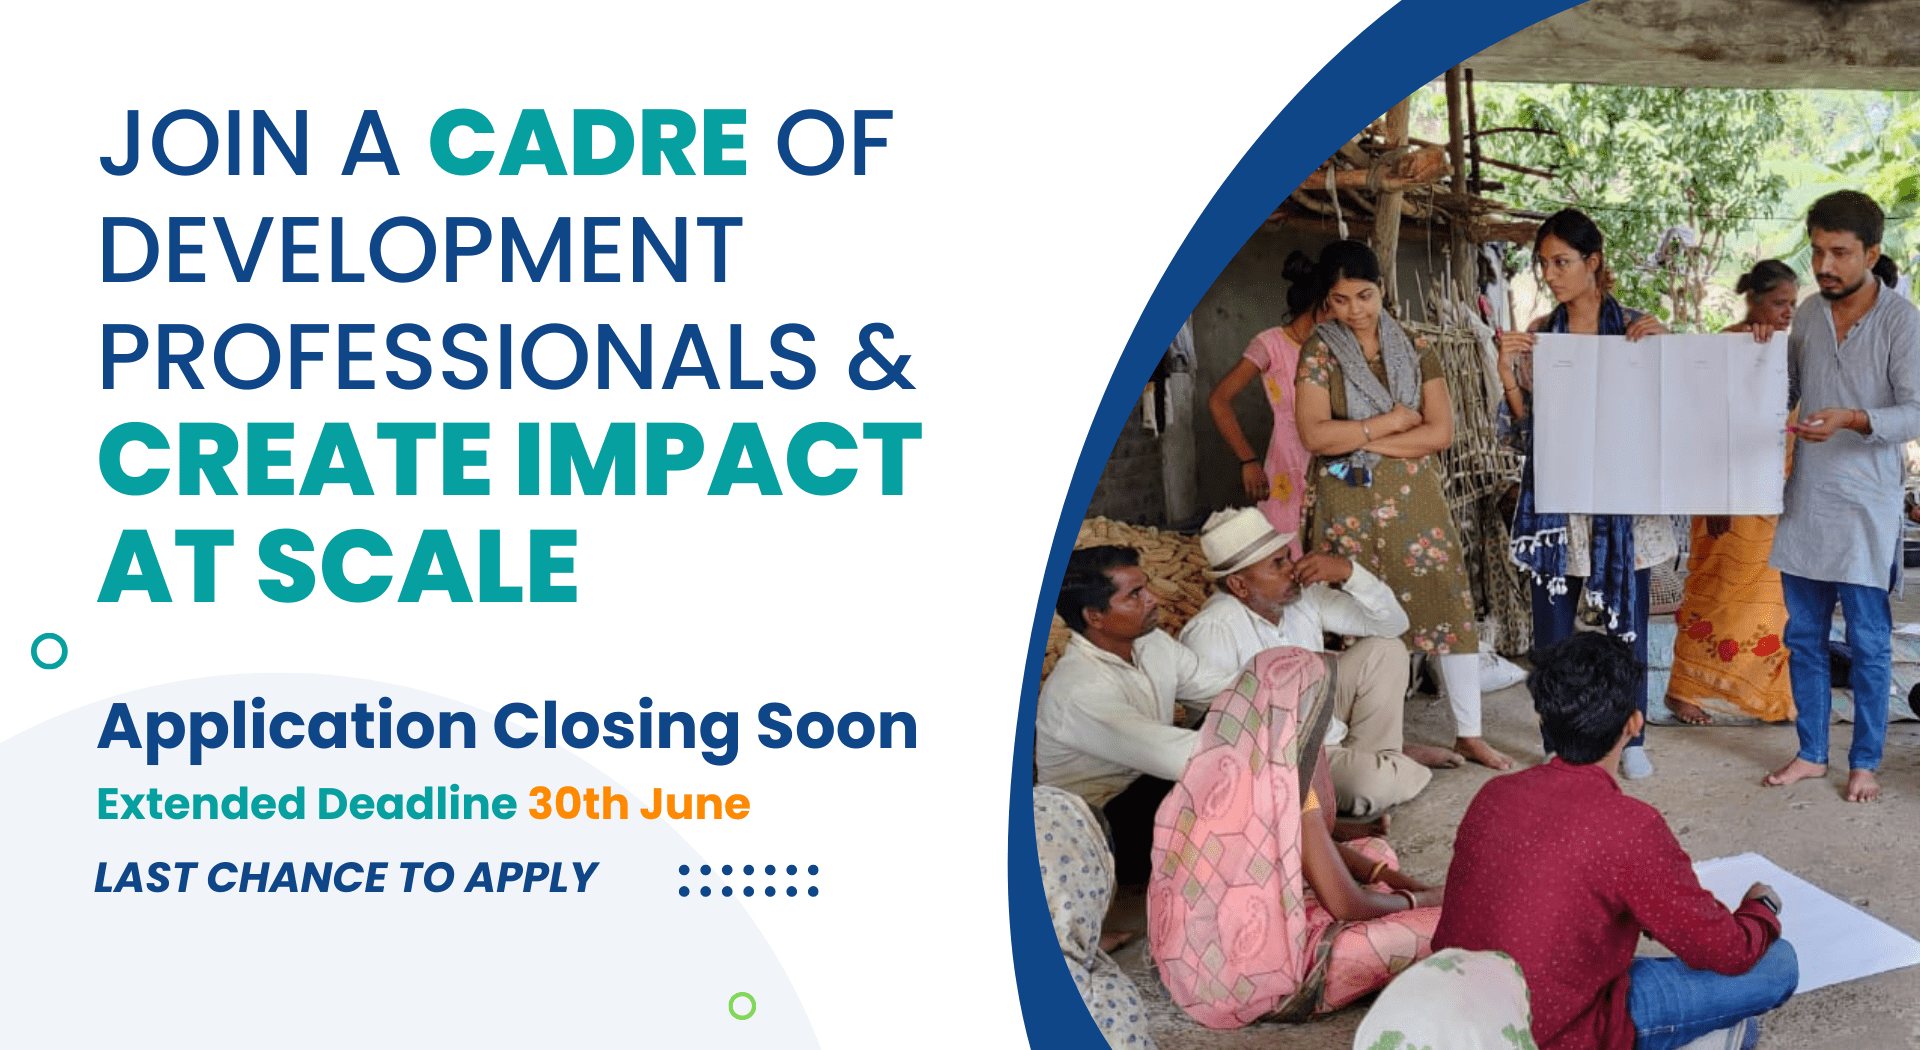 Join a Cadre of Development Professional & Create Impact at Scale